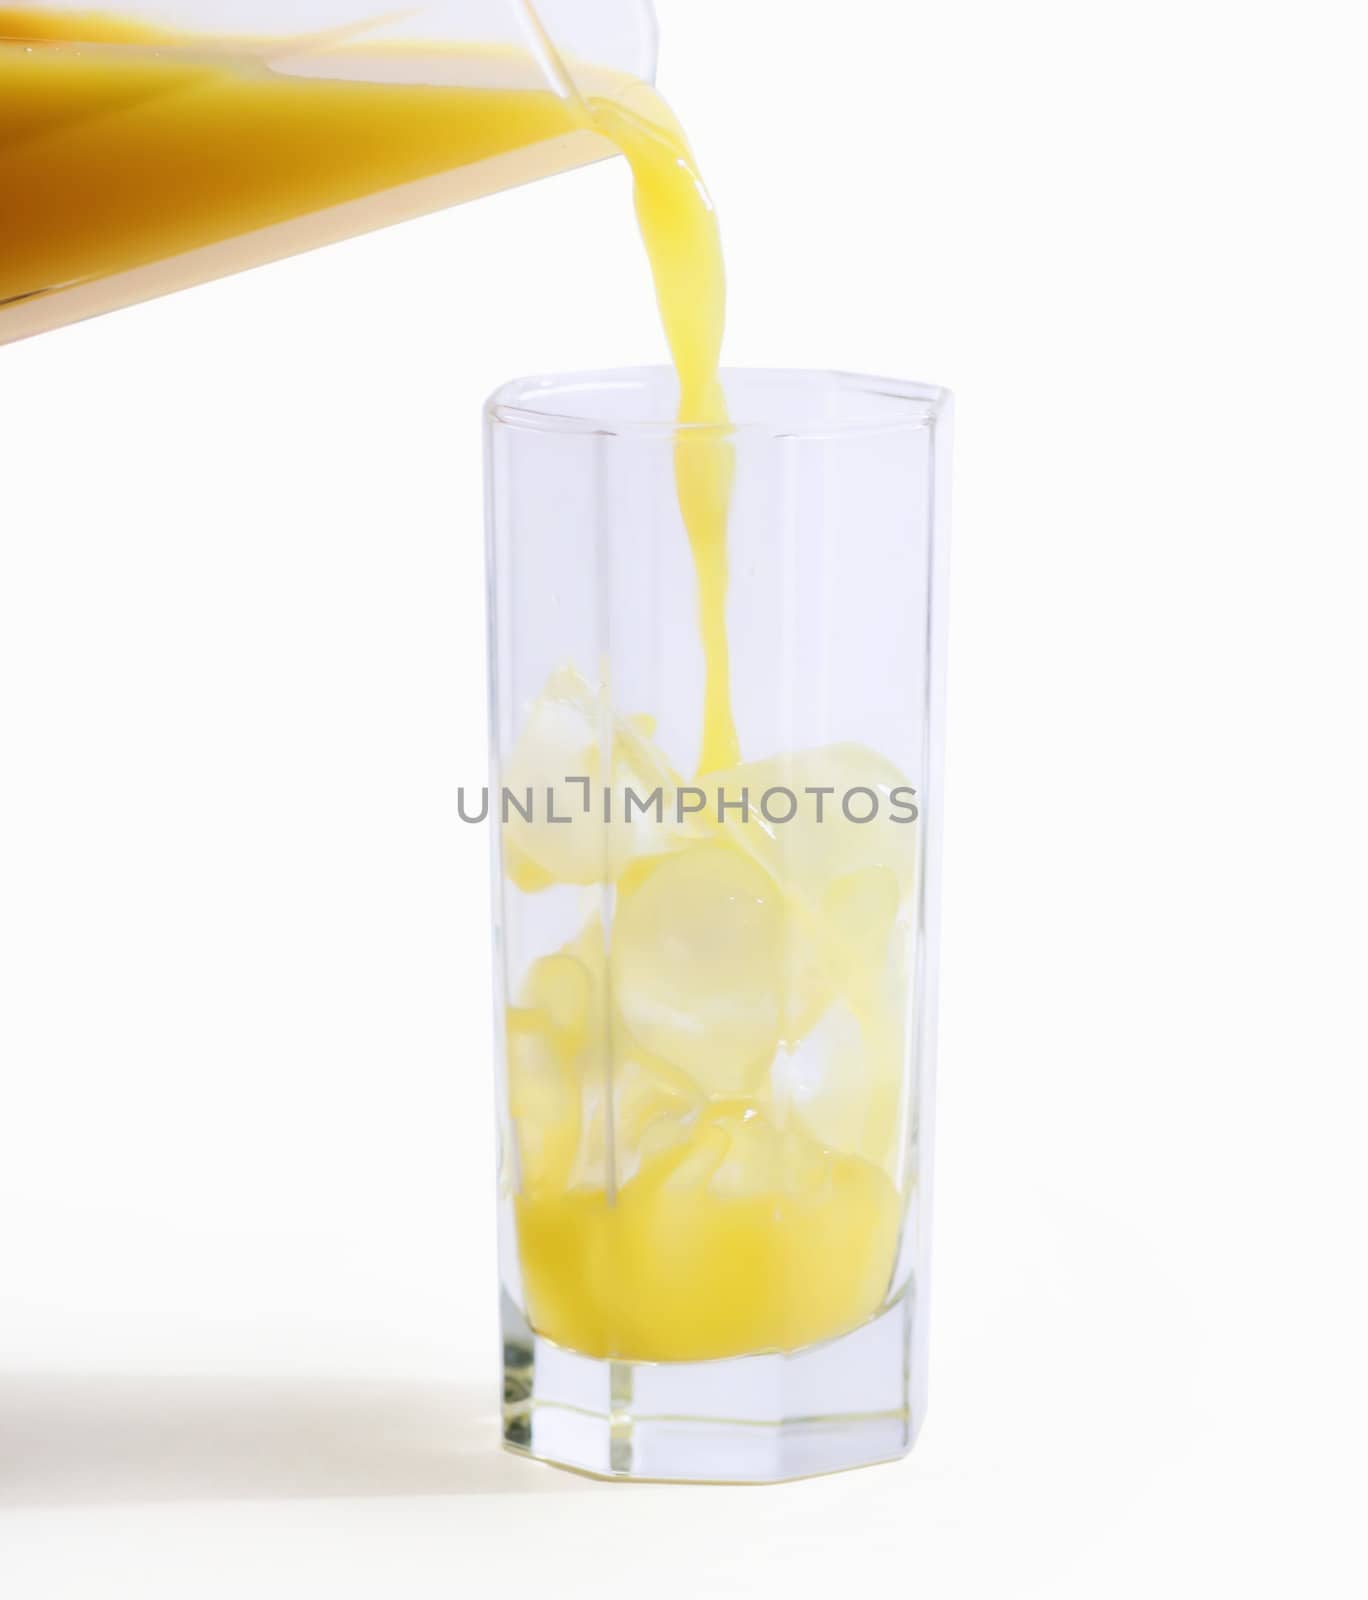 orange juce pouring in a glass on white background  with space for your text  - hand made clipping path included